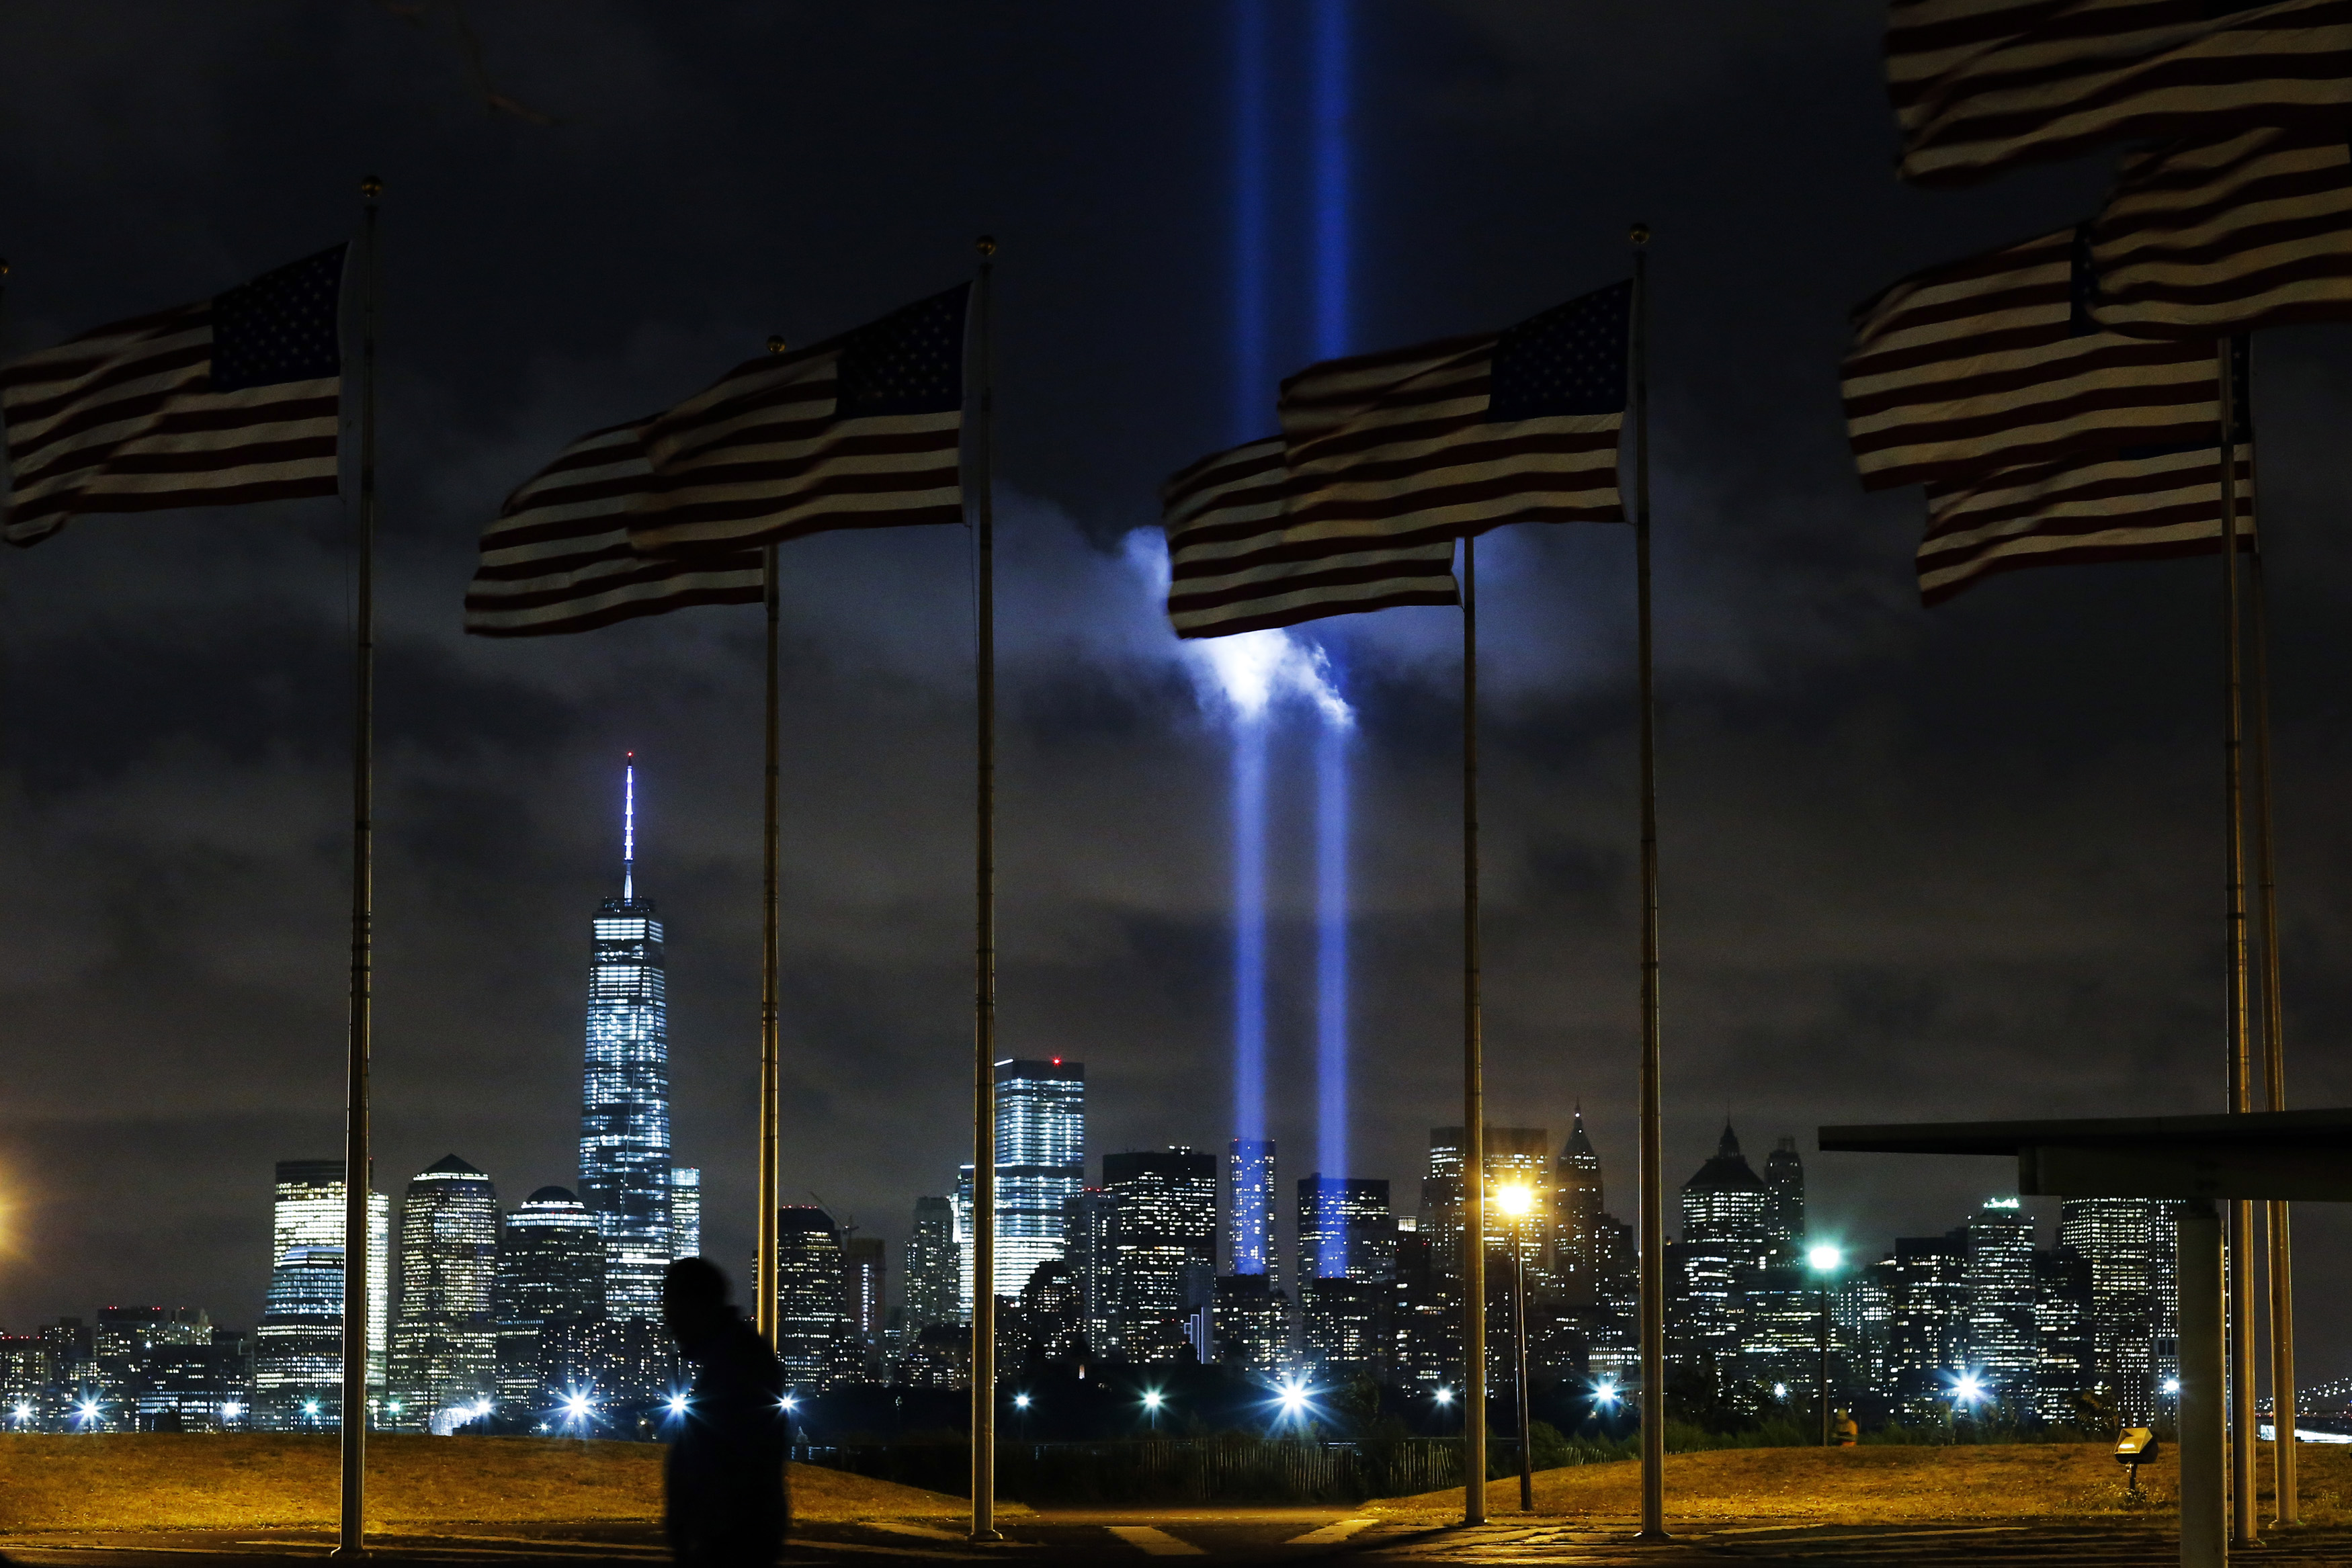 Man walks past as the Tribute in Light is illuminated on the skyline of lower Manhattan during events marking the 13th anniversary of the 9/11 attacks on the World Trade Center in New York